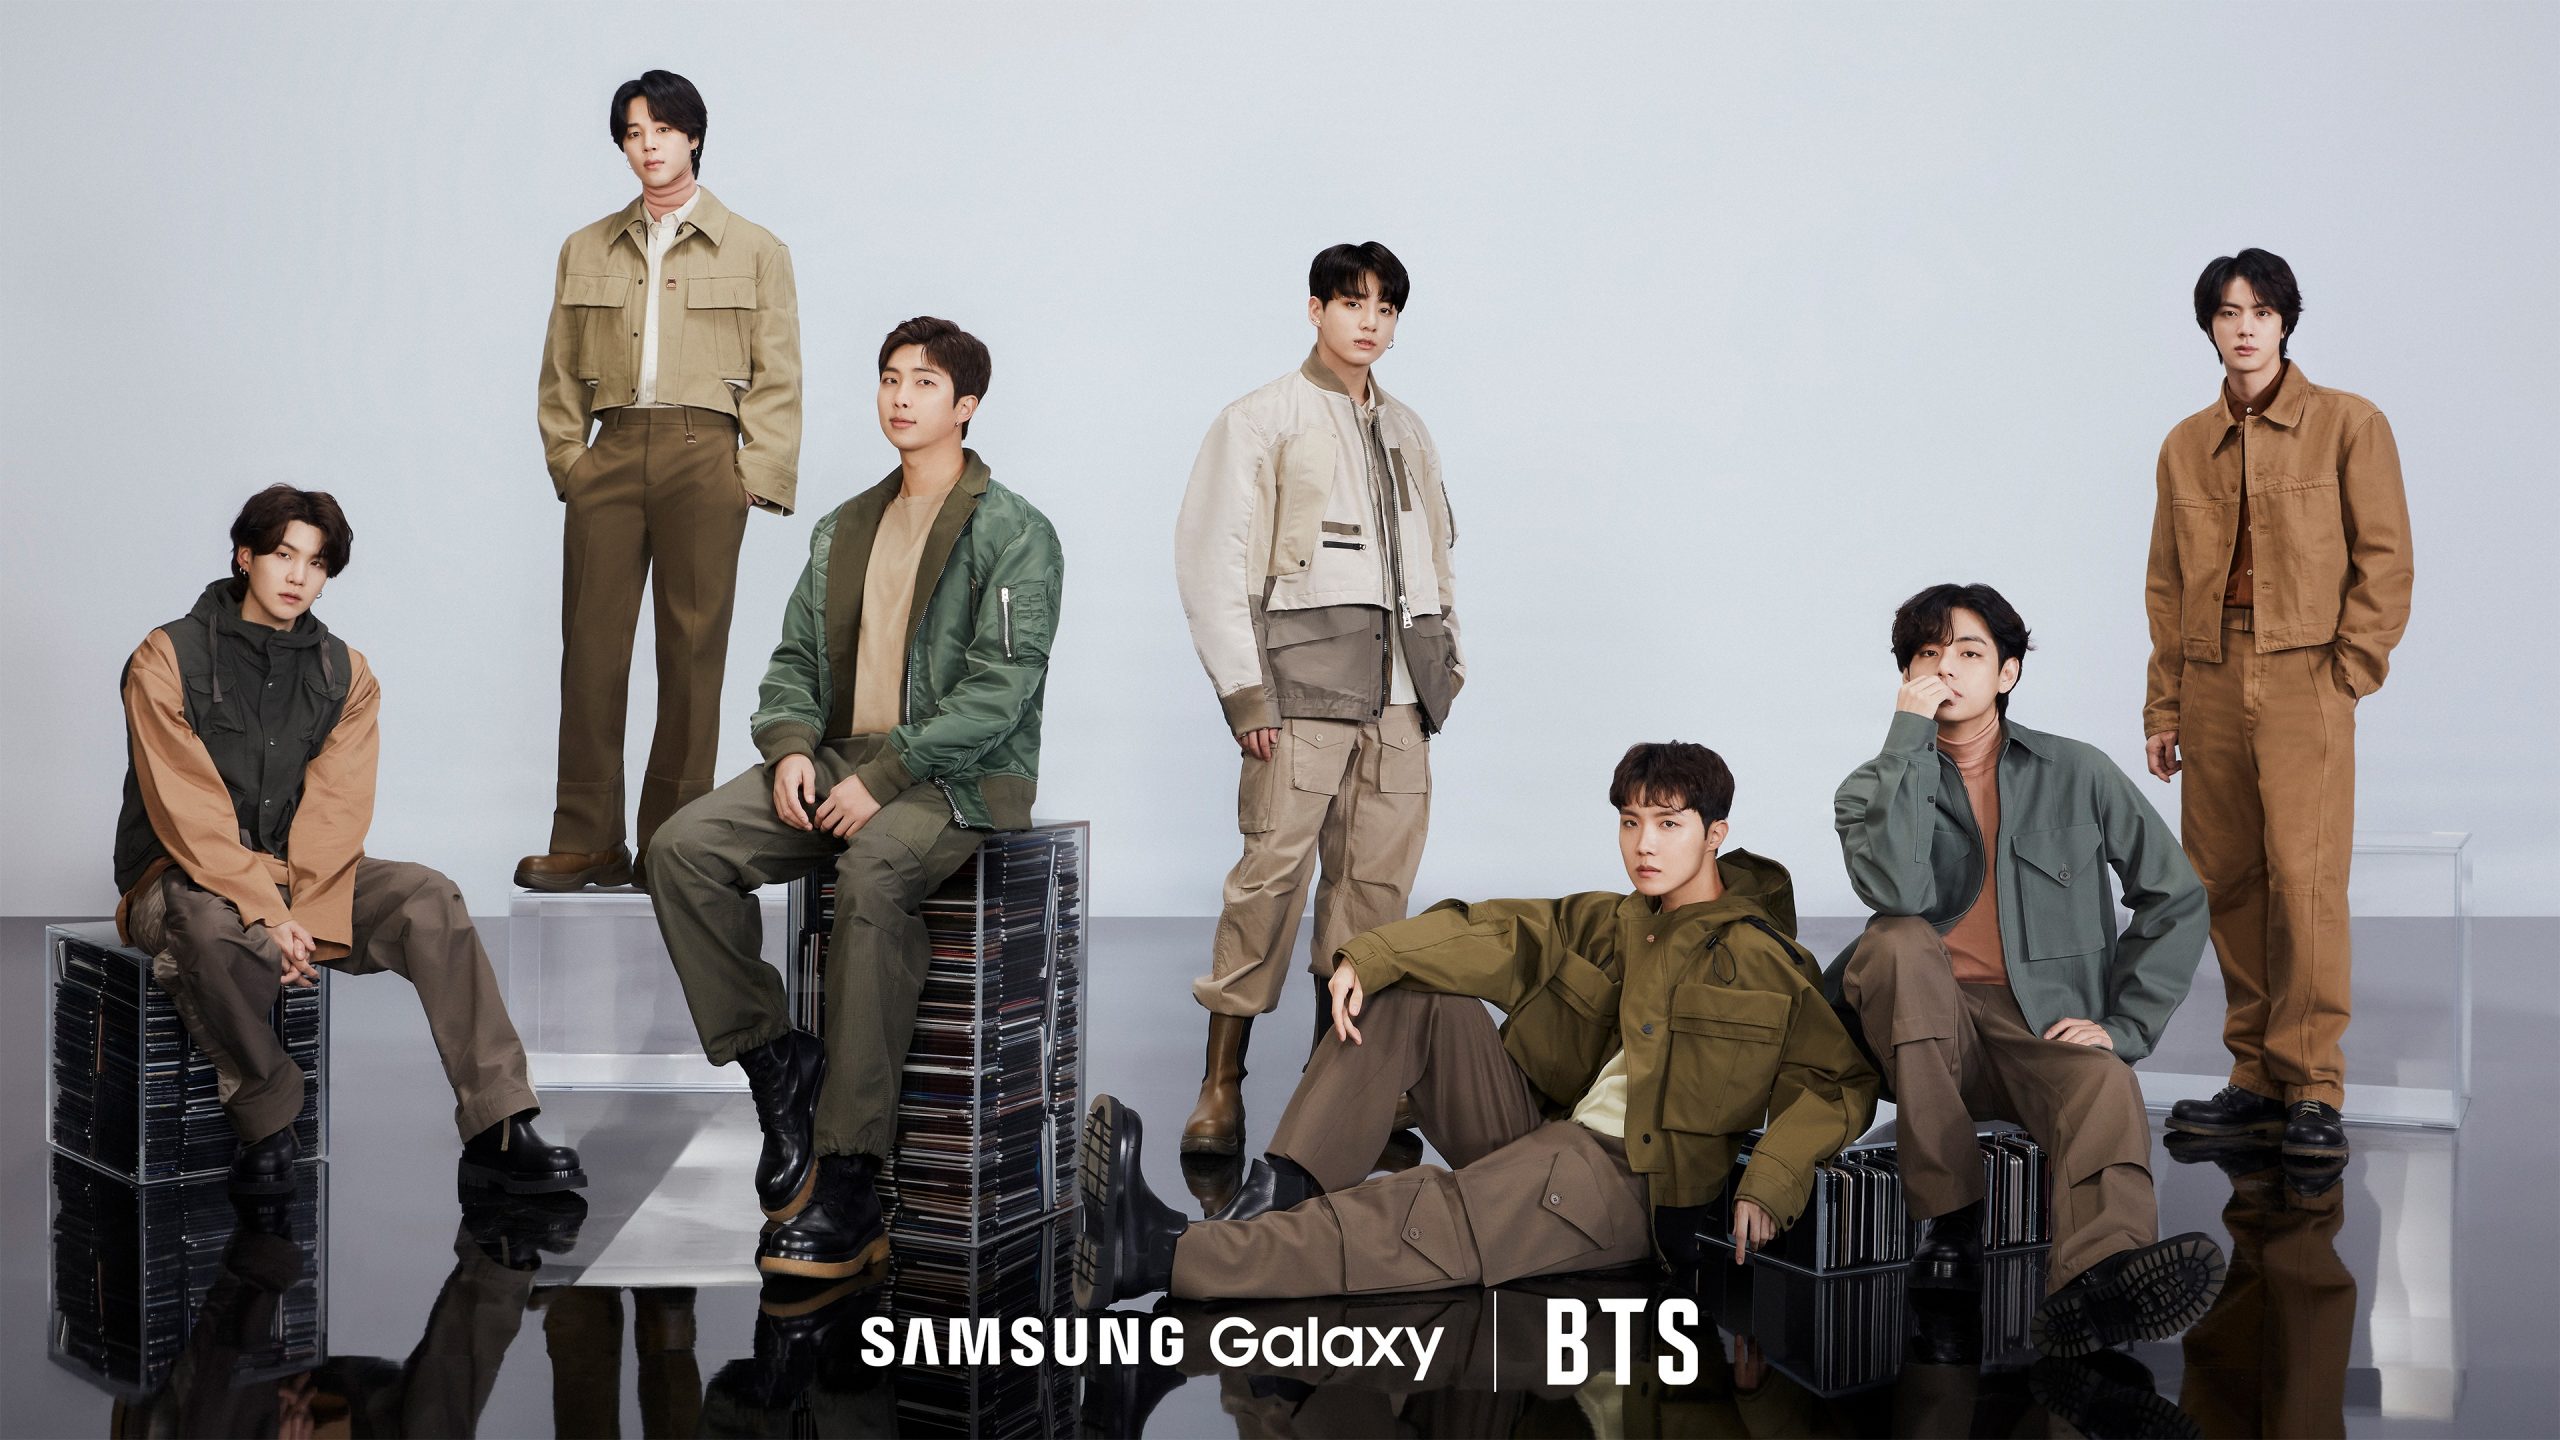 Samsung Unveils New HD Photos Of BTS Along With Galaxy S22 Ultra